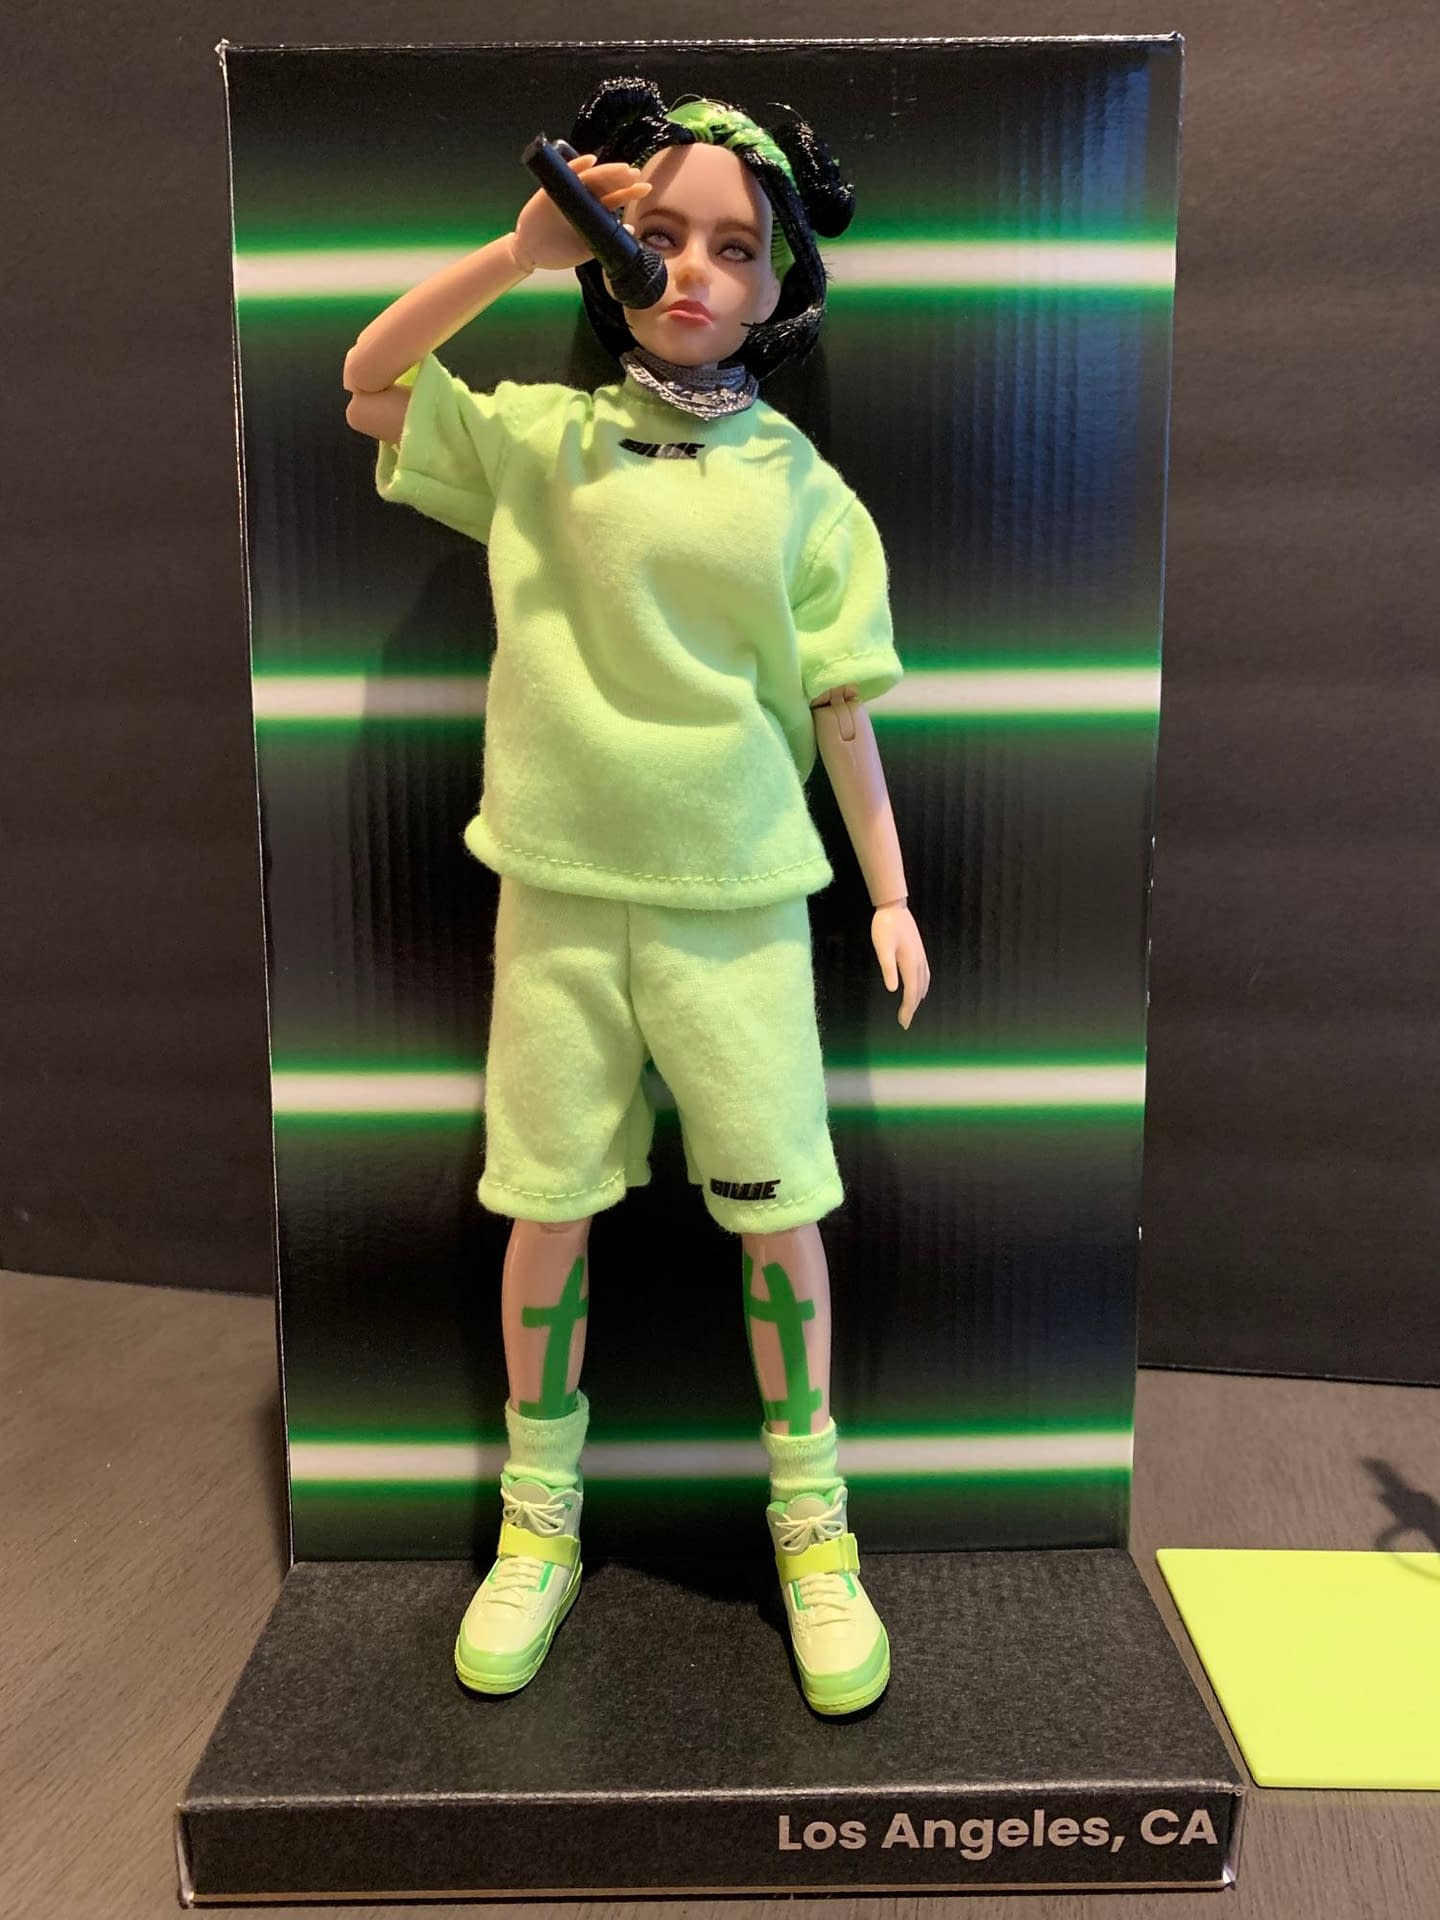 New Billie Eilsh Figures Are Hitting Target Stores From Playmates Now